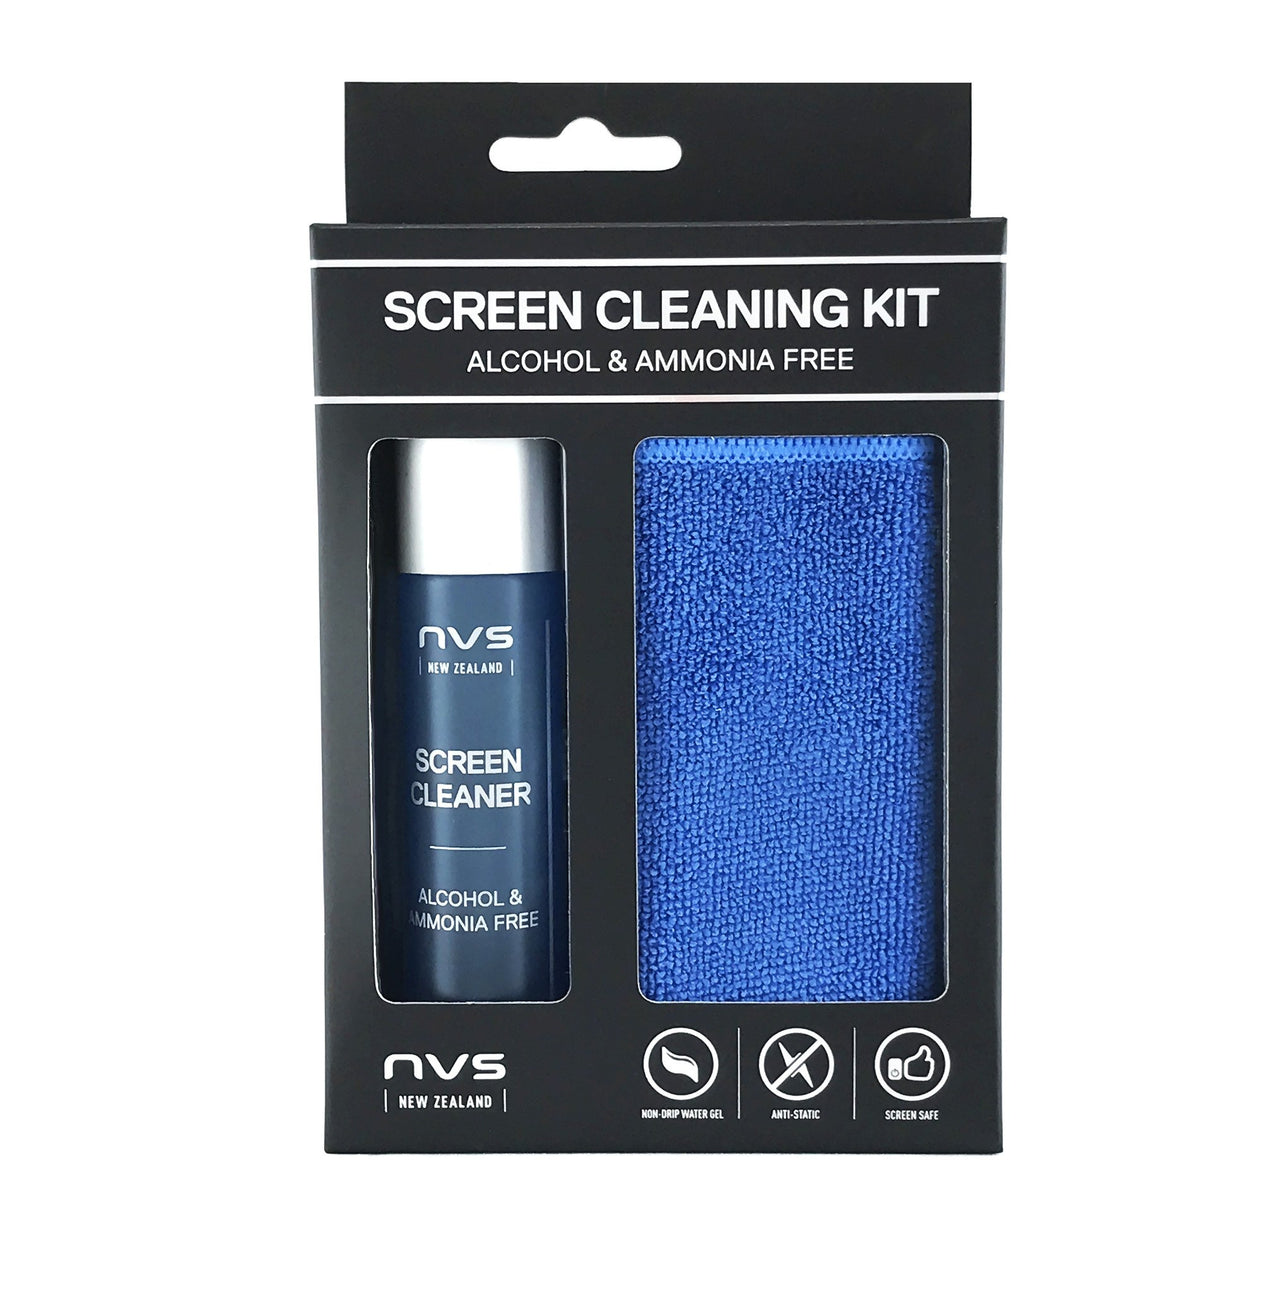 nvs screen cleaning kit (30 ml) 6-pack counter display